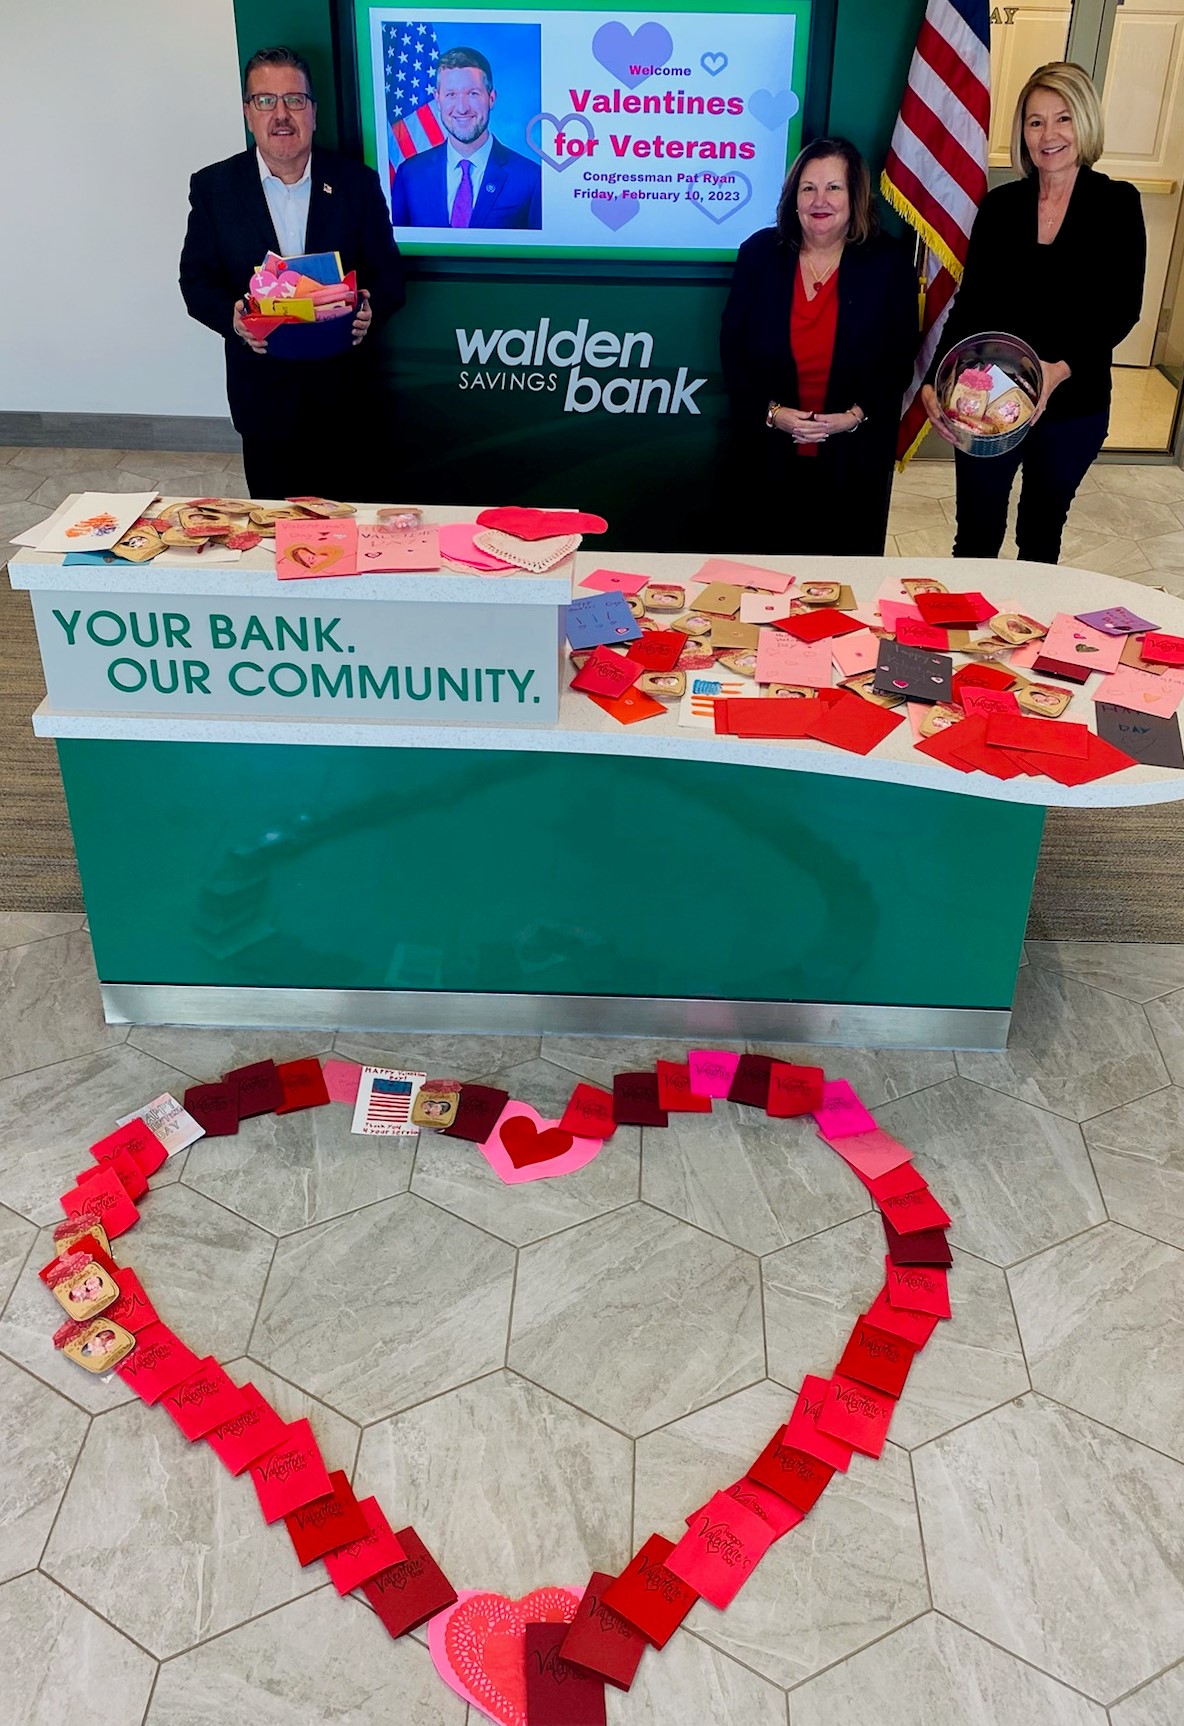 Honoring, Thanking and Sending Love to Veterans: Walden Savings Bank Participates in Valentines for Veterans Program for 8th Straight Year